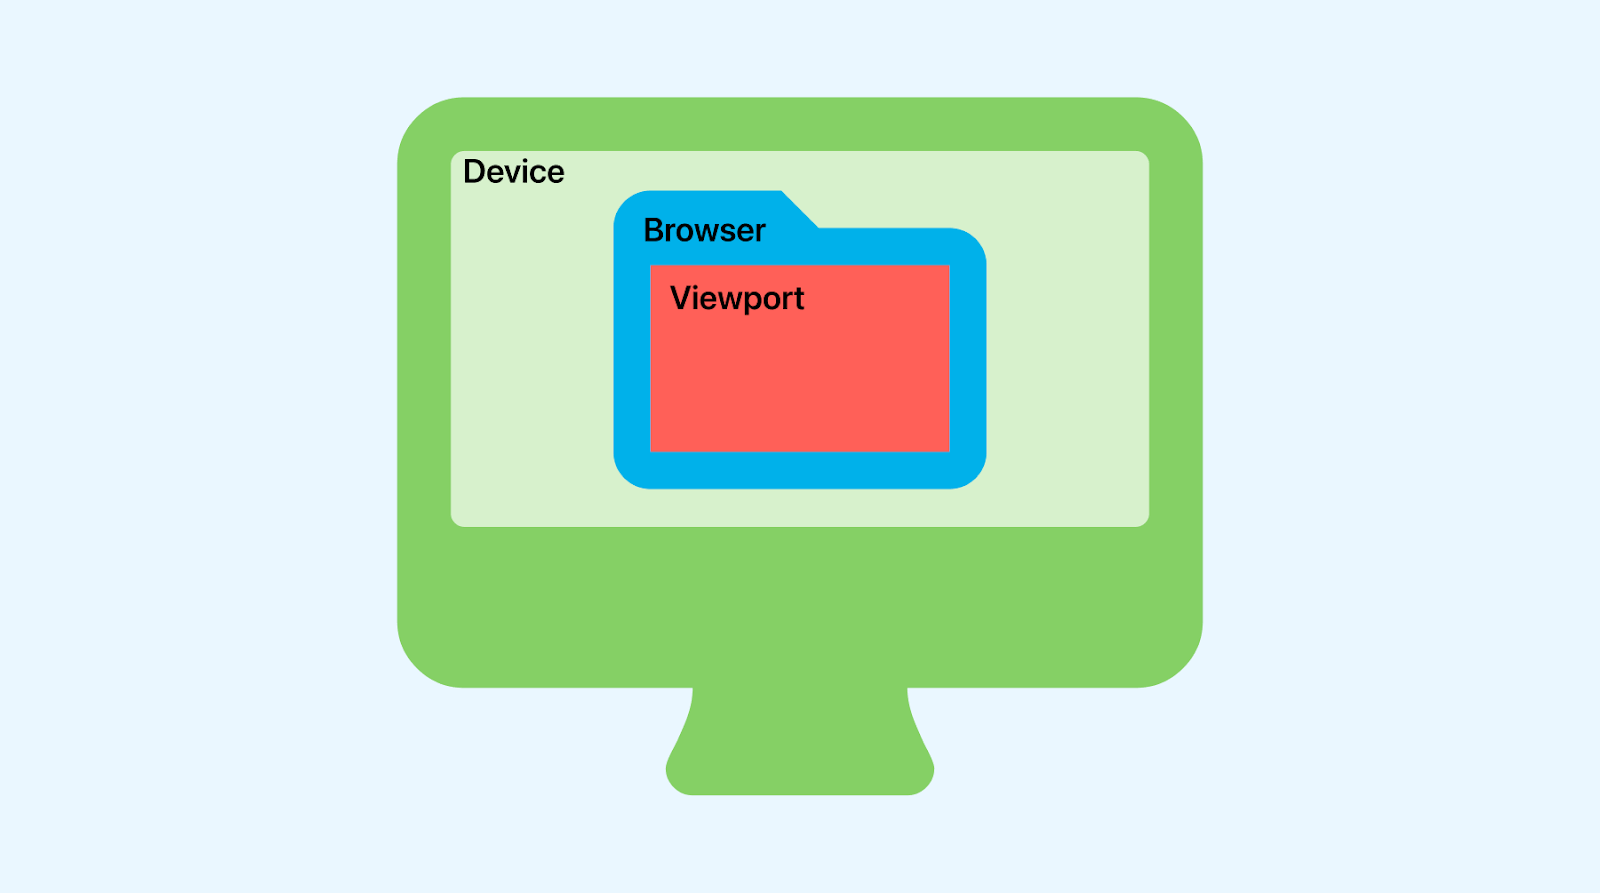 What are Viewports?